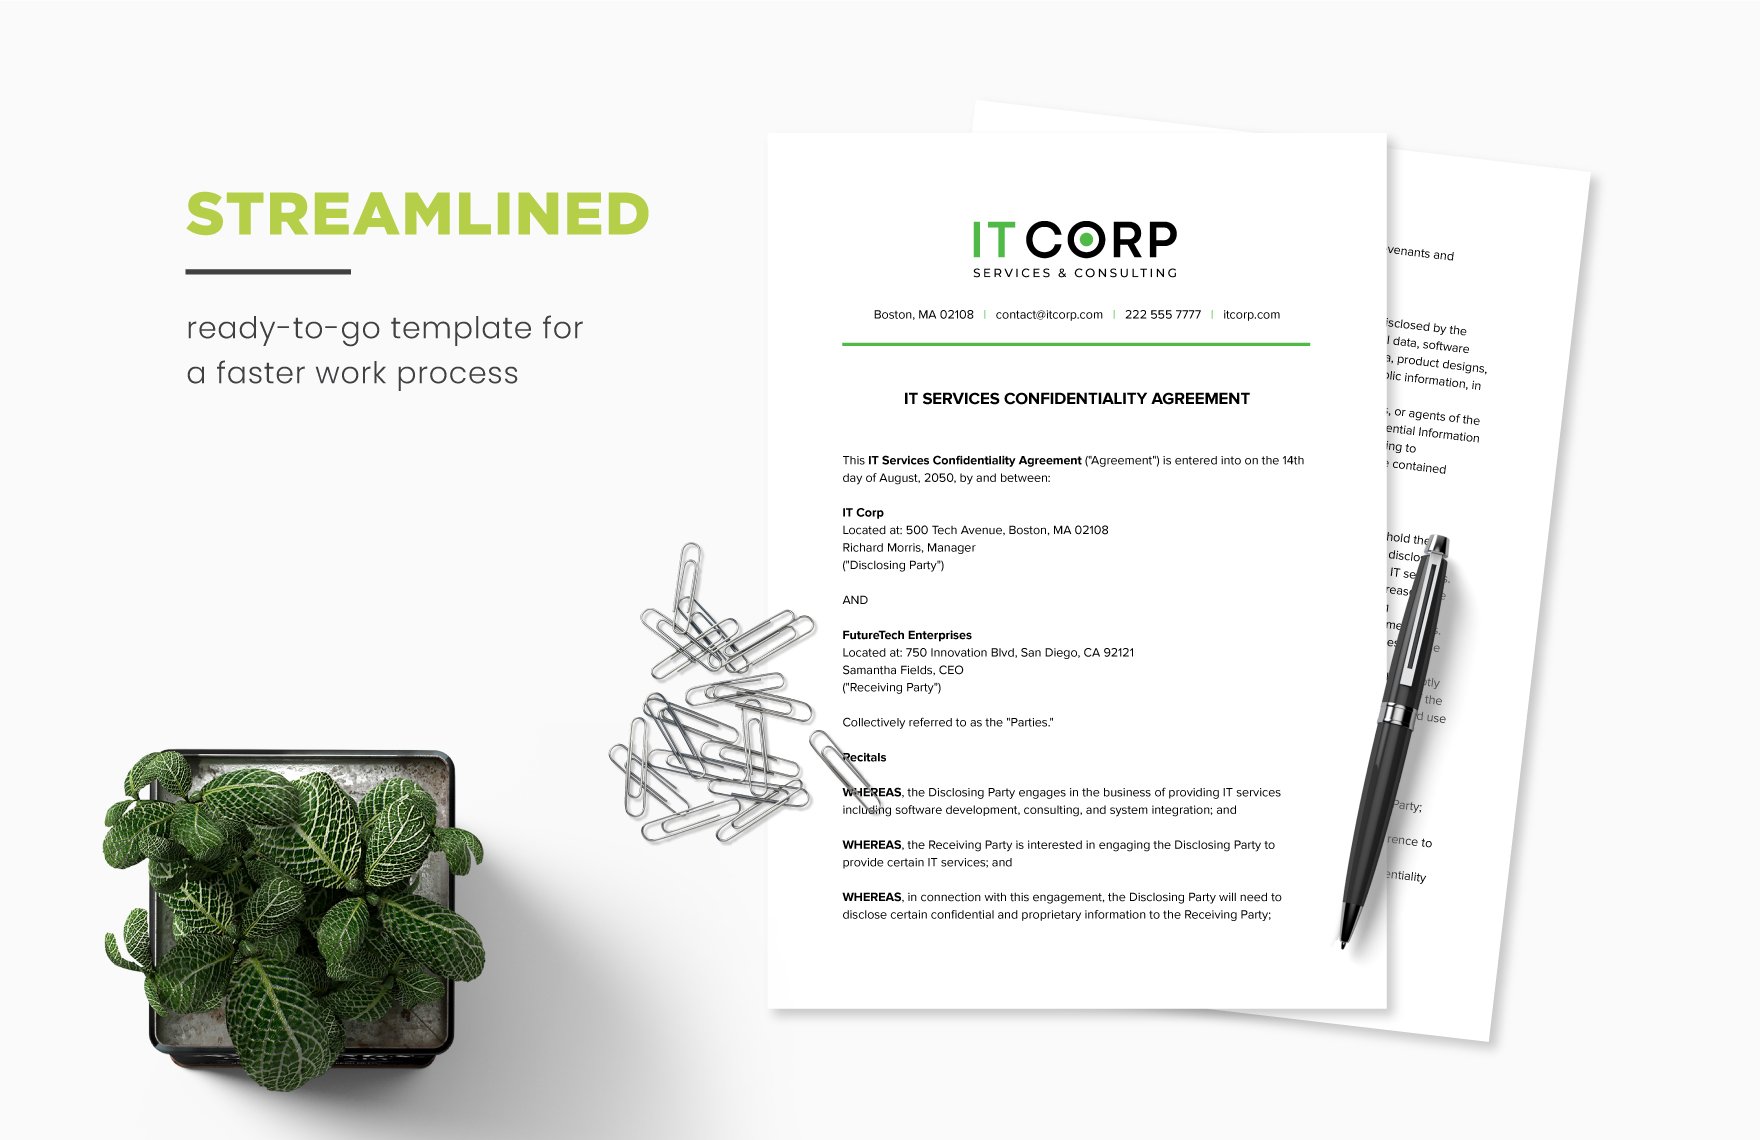 15 IT Services and Consulting Agreement Template Bundle